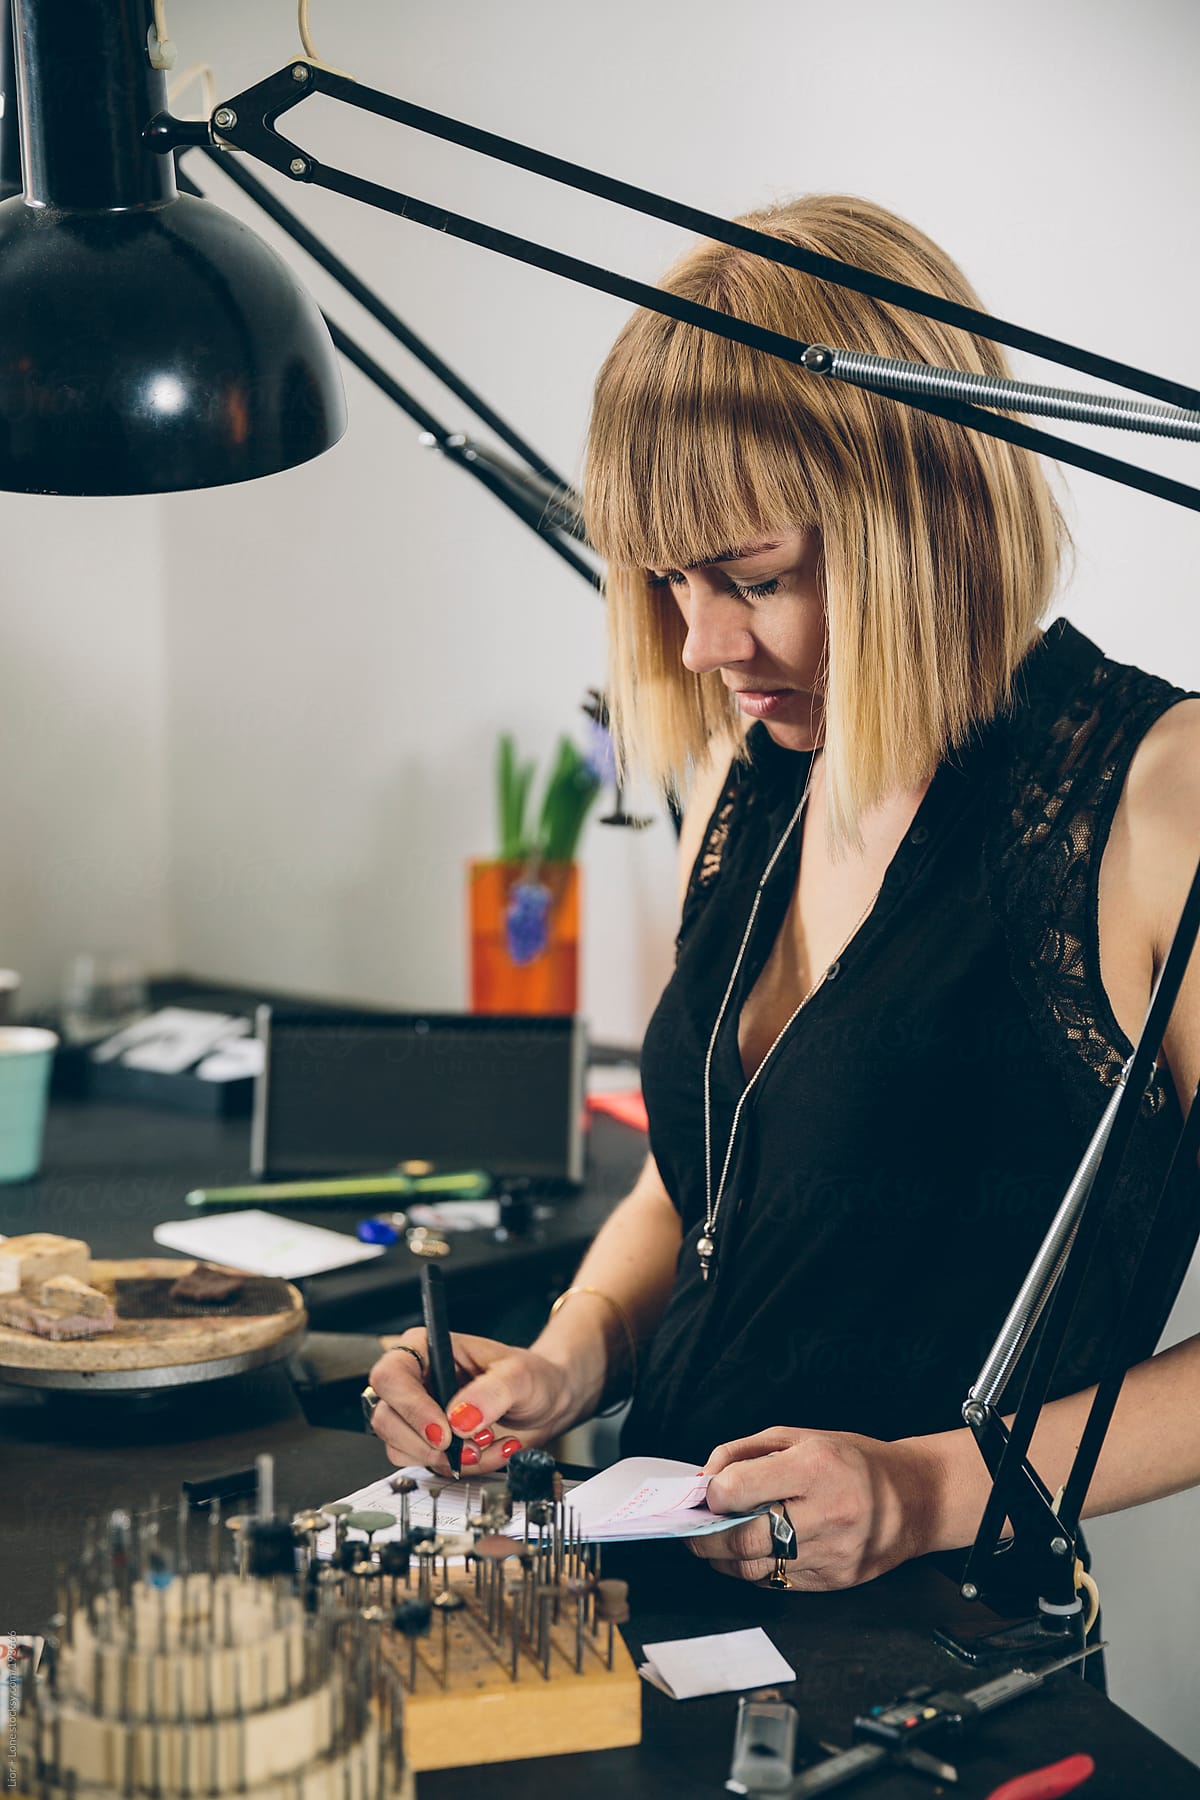 A jewelry designer taking an order in her studio